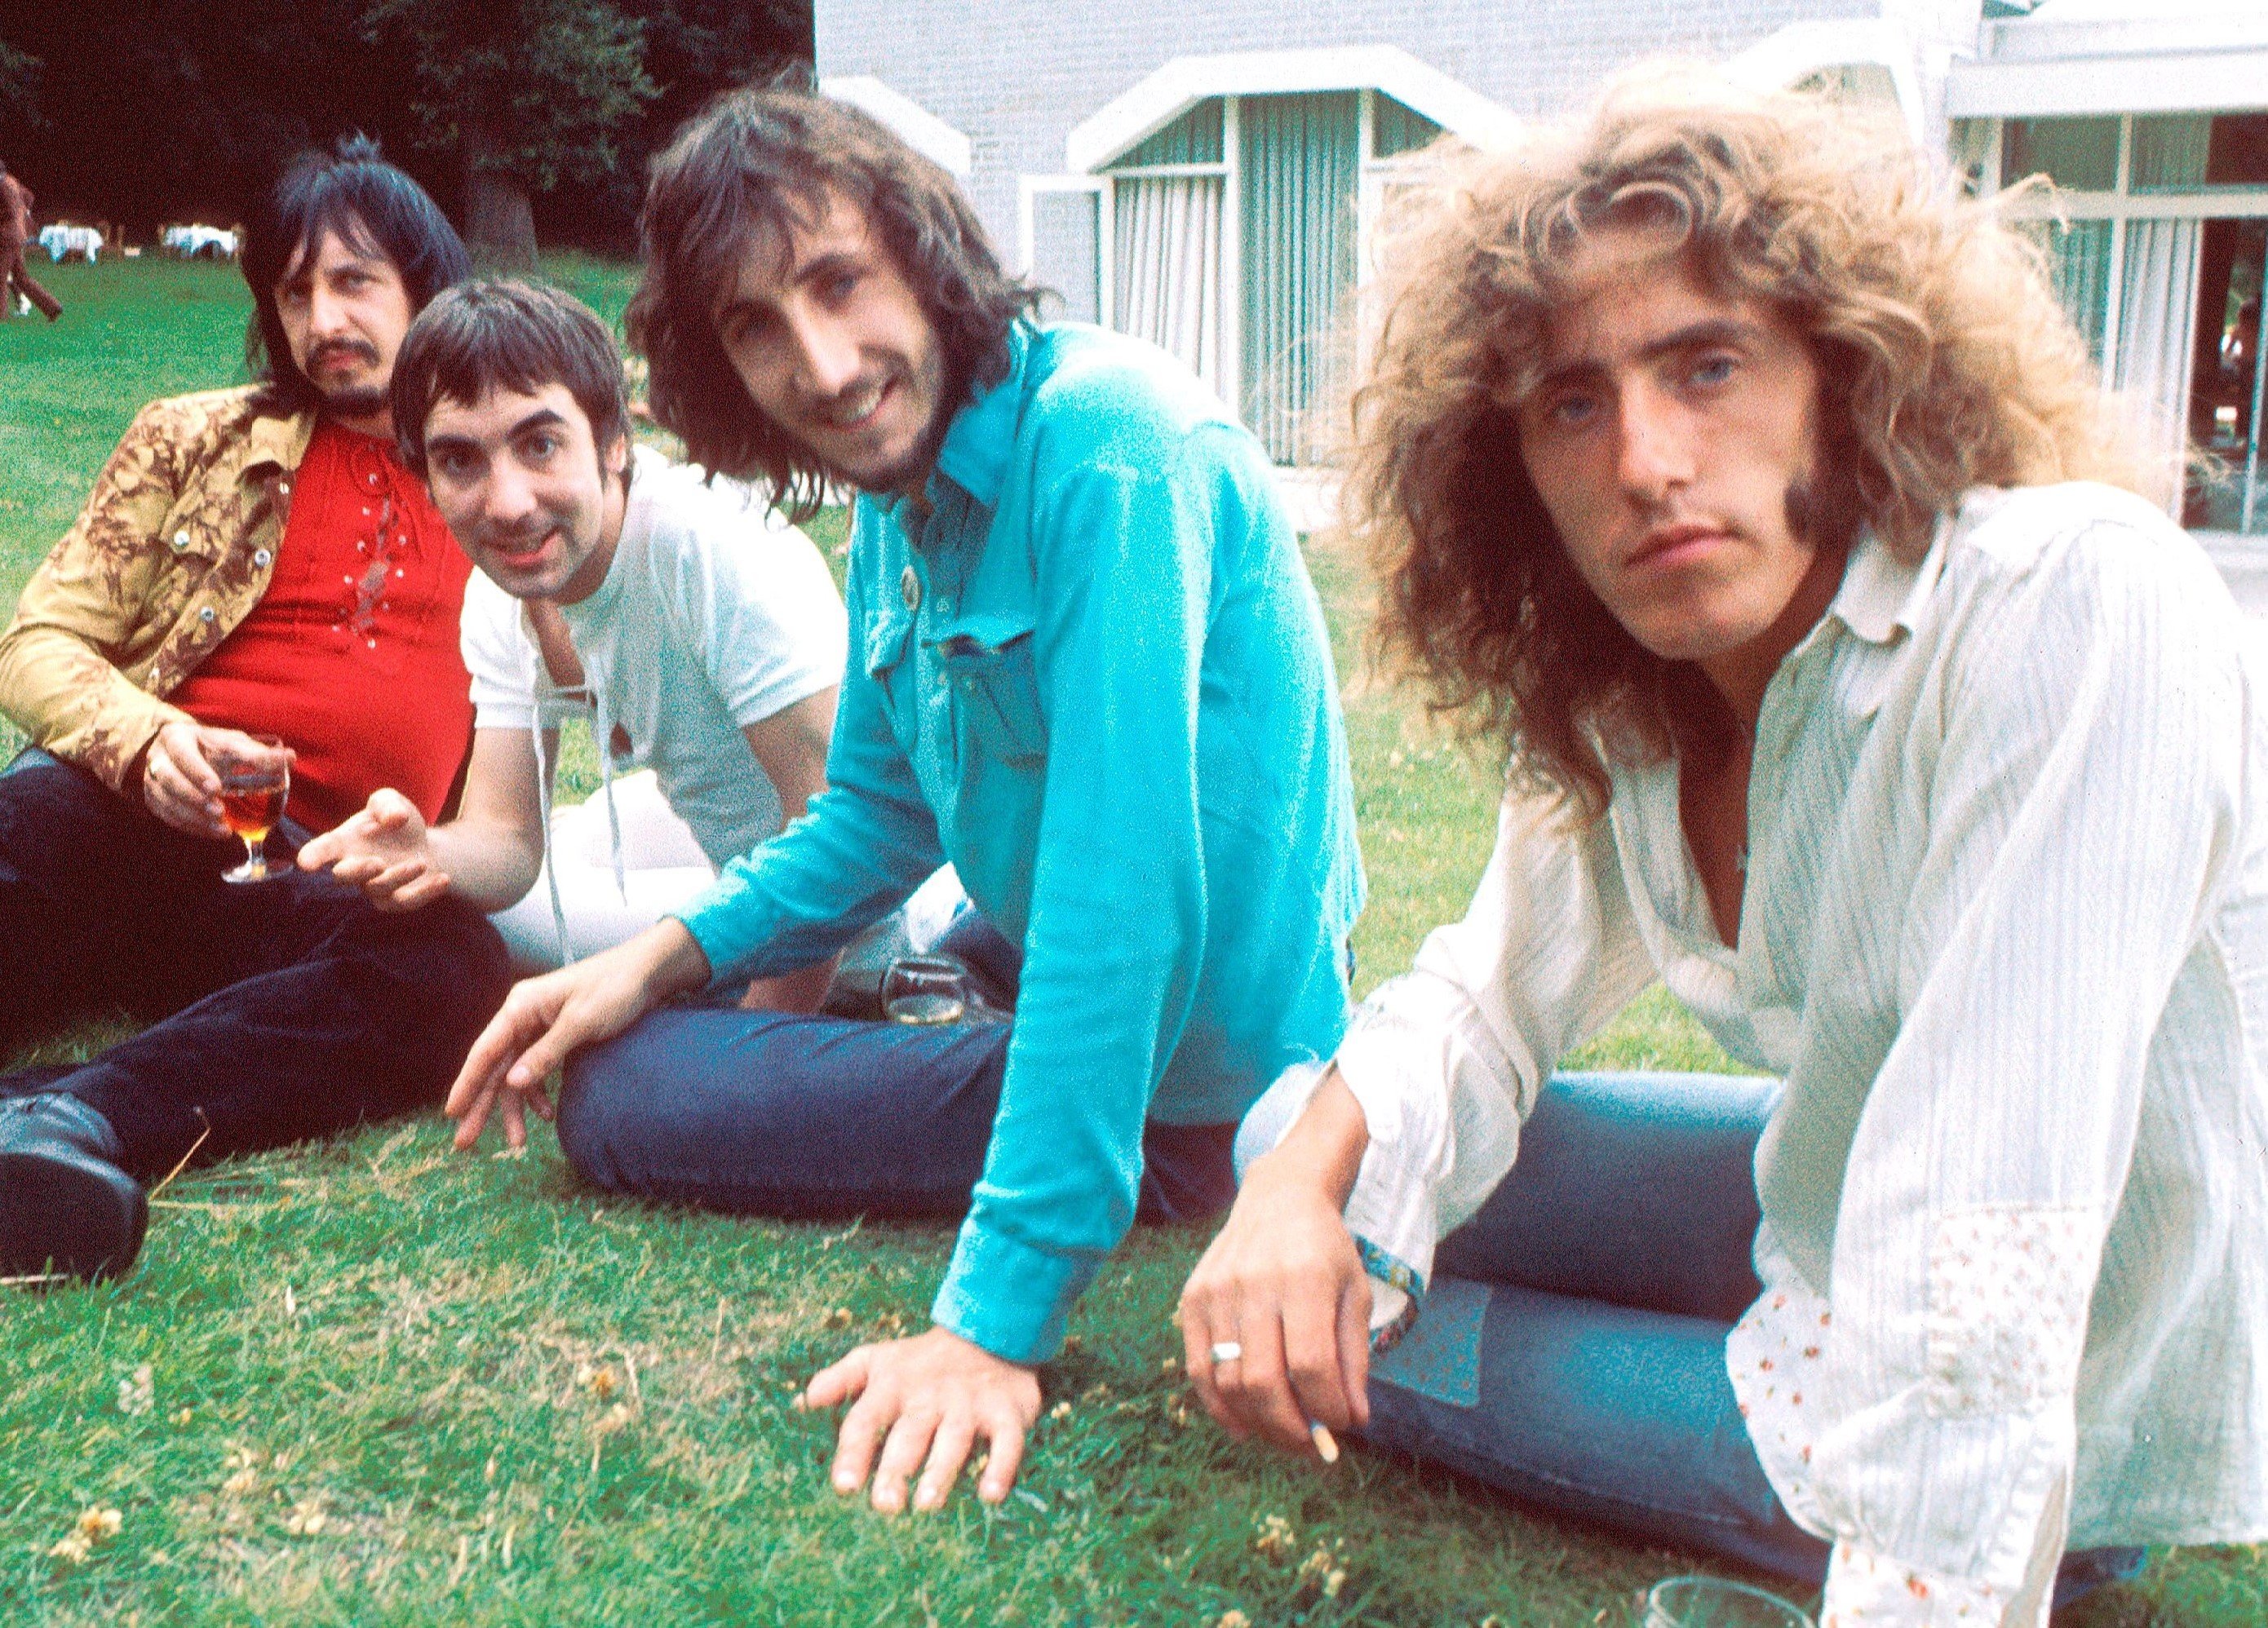 The Who on the grass